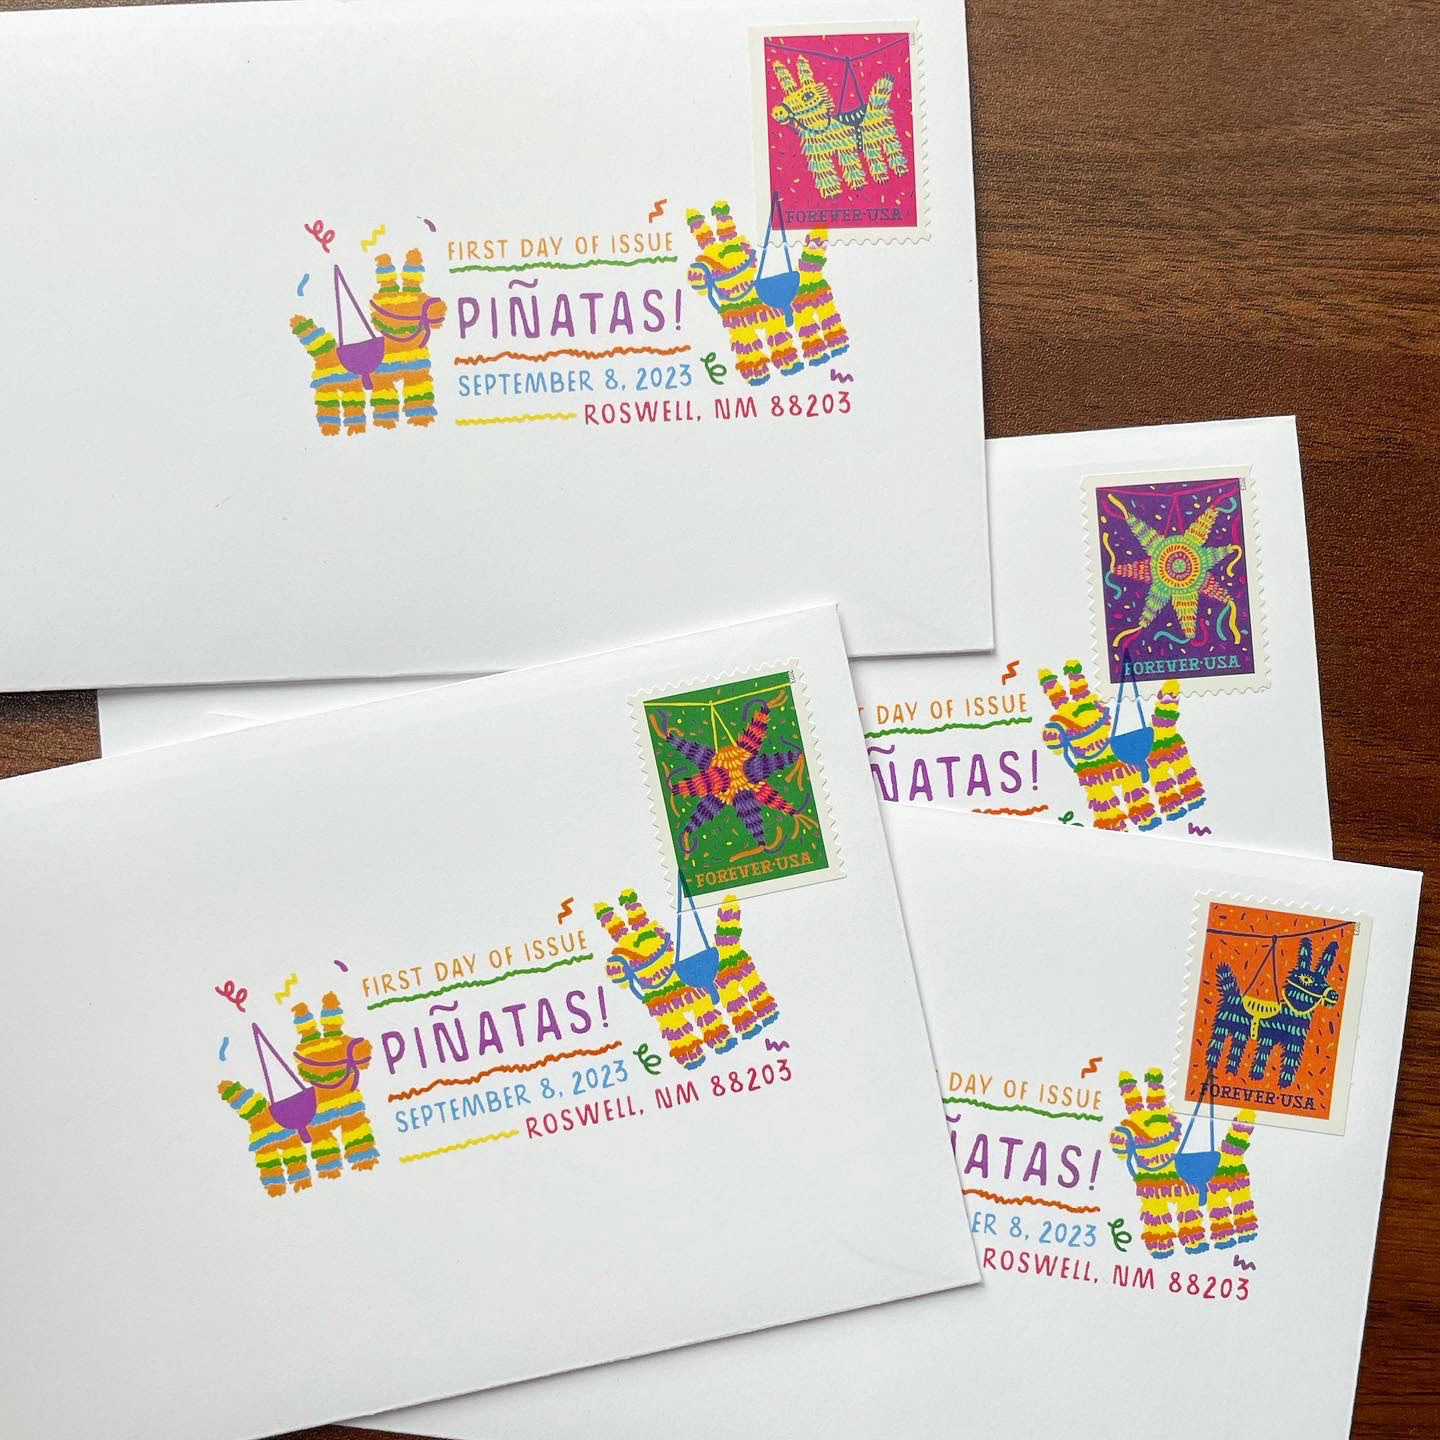 USPS' new piñata stamps created by Seattle artist Victor Meléndez